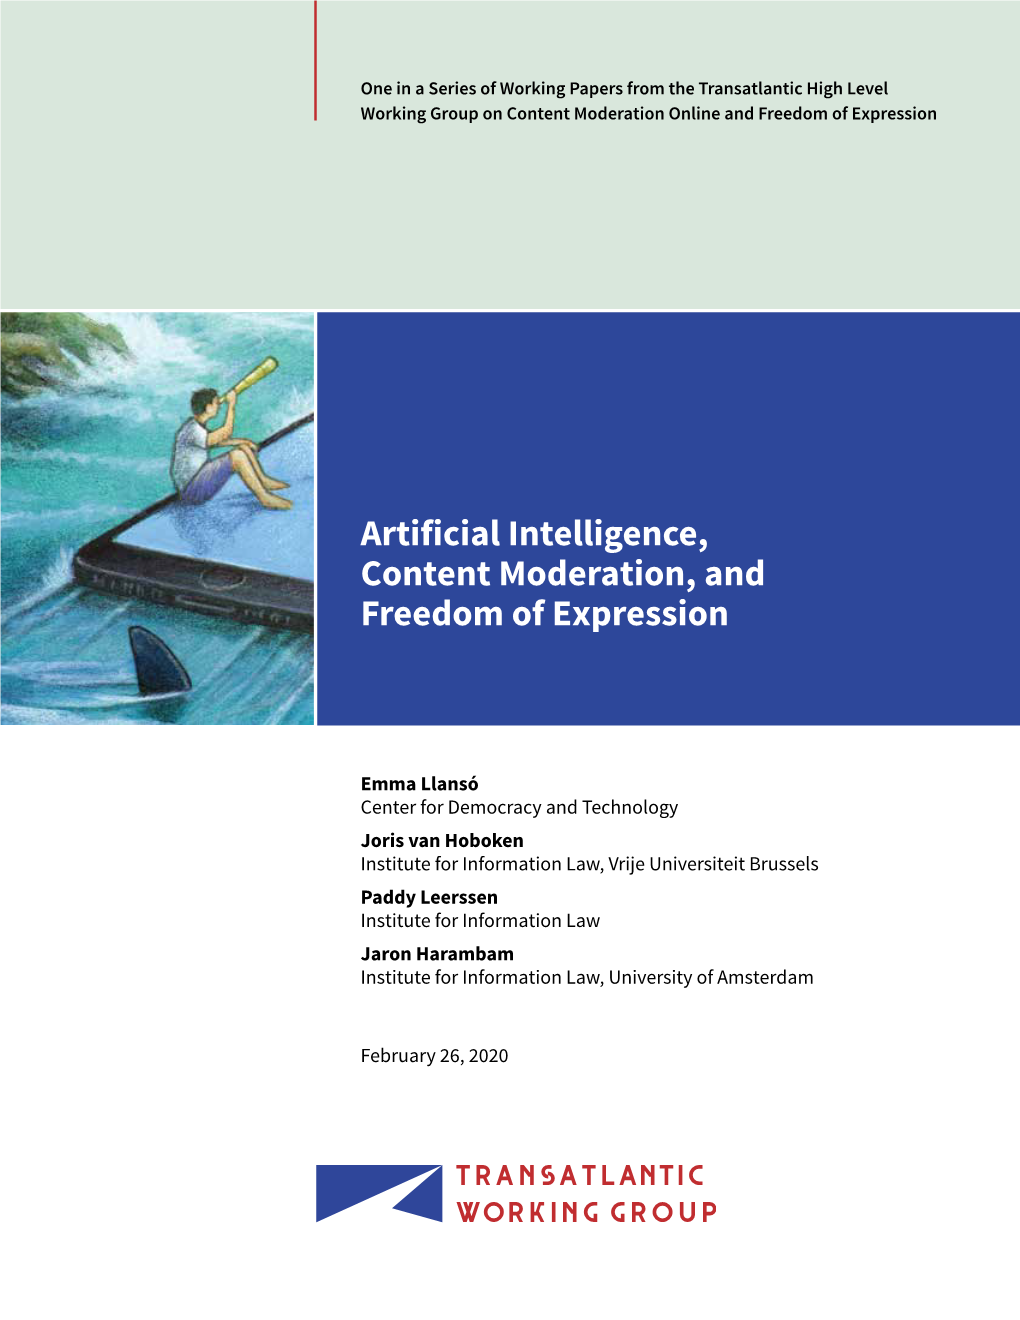 Artificial Intelligence, Content Moderation, and Freedom of Expression